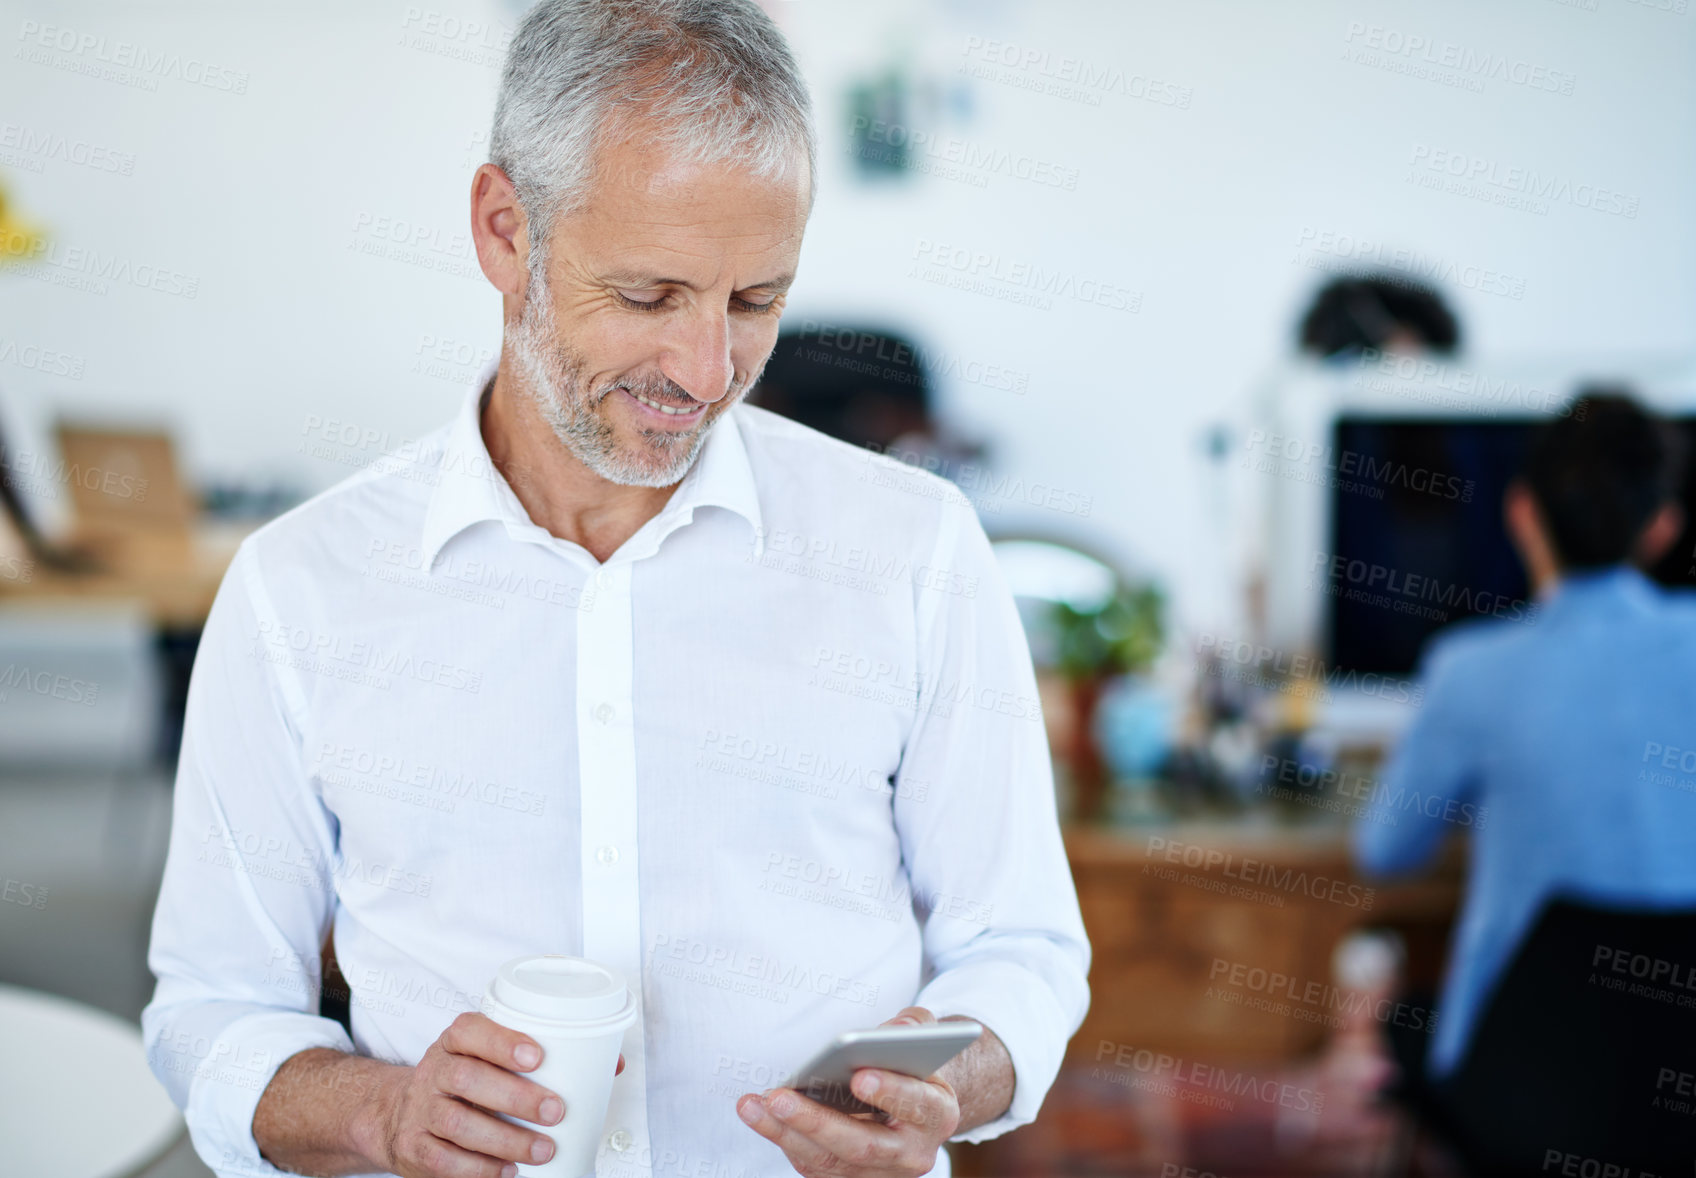 Buy stock photo Portrait of a mature businessman using a cellphone while standing in an office